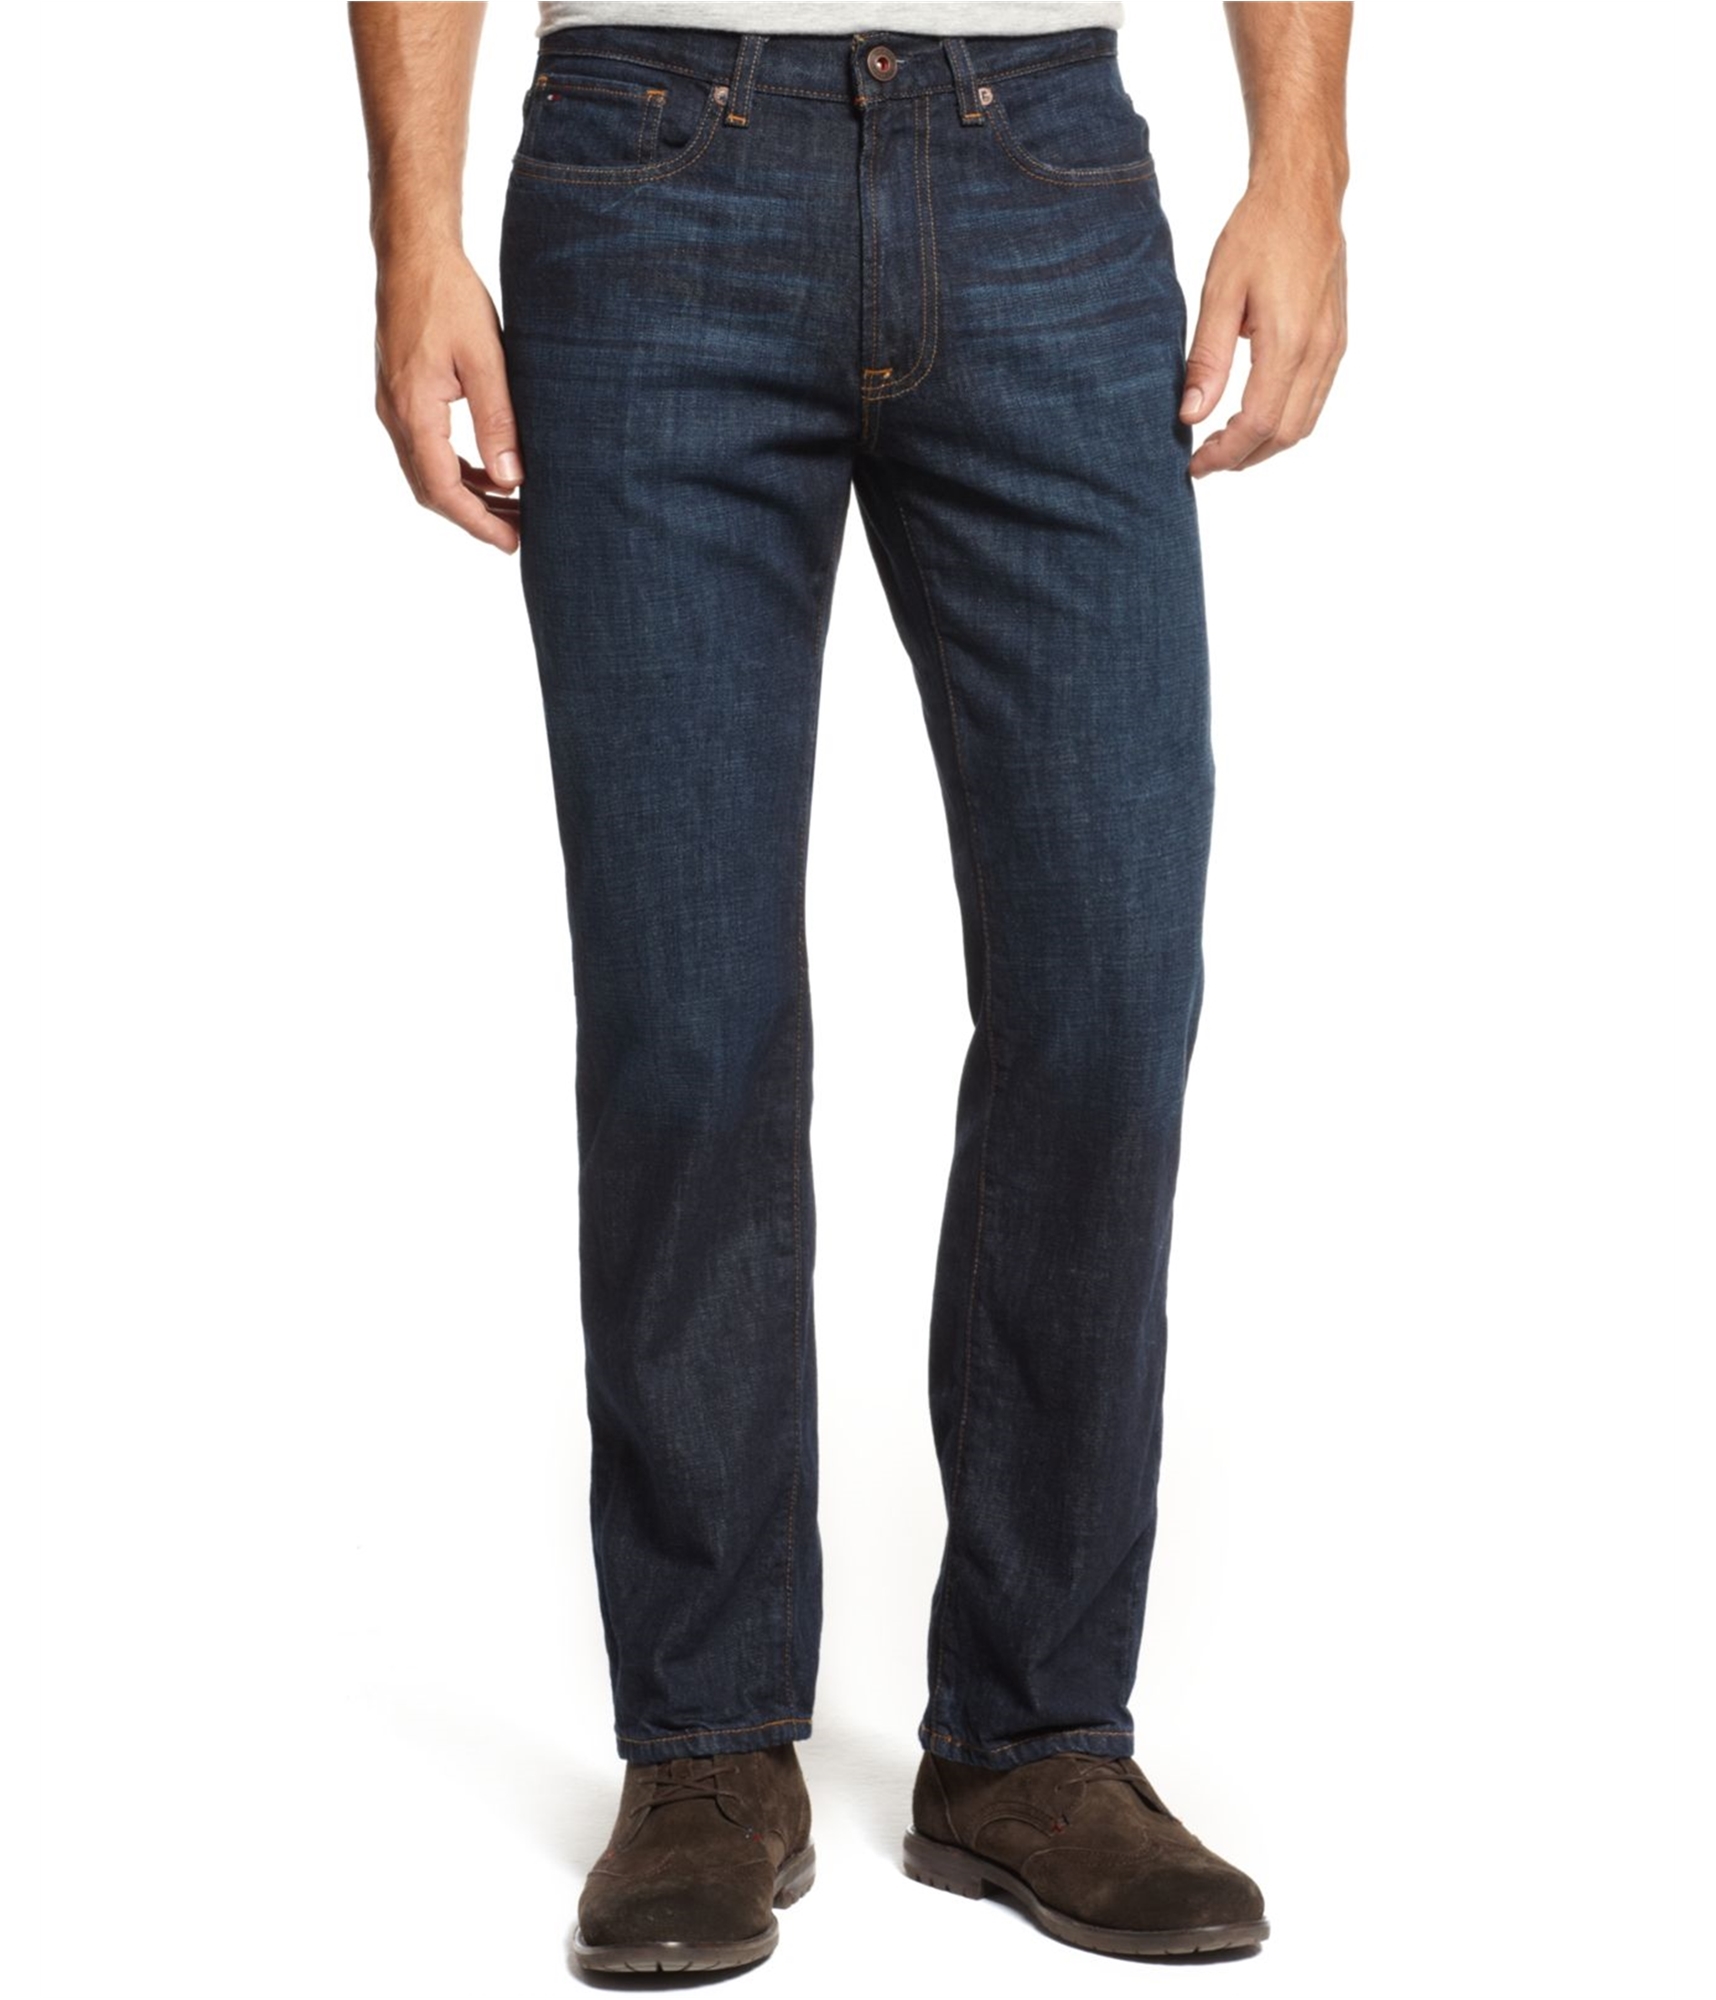 rolle Smil når som helst Buy a Mens Tommy Hilfiger Rock Freedom Relaxed Jeans Online | TagsWeekly.com